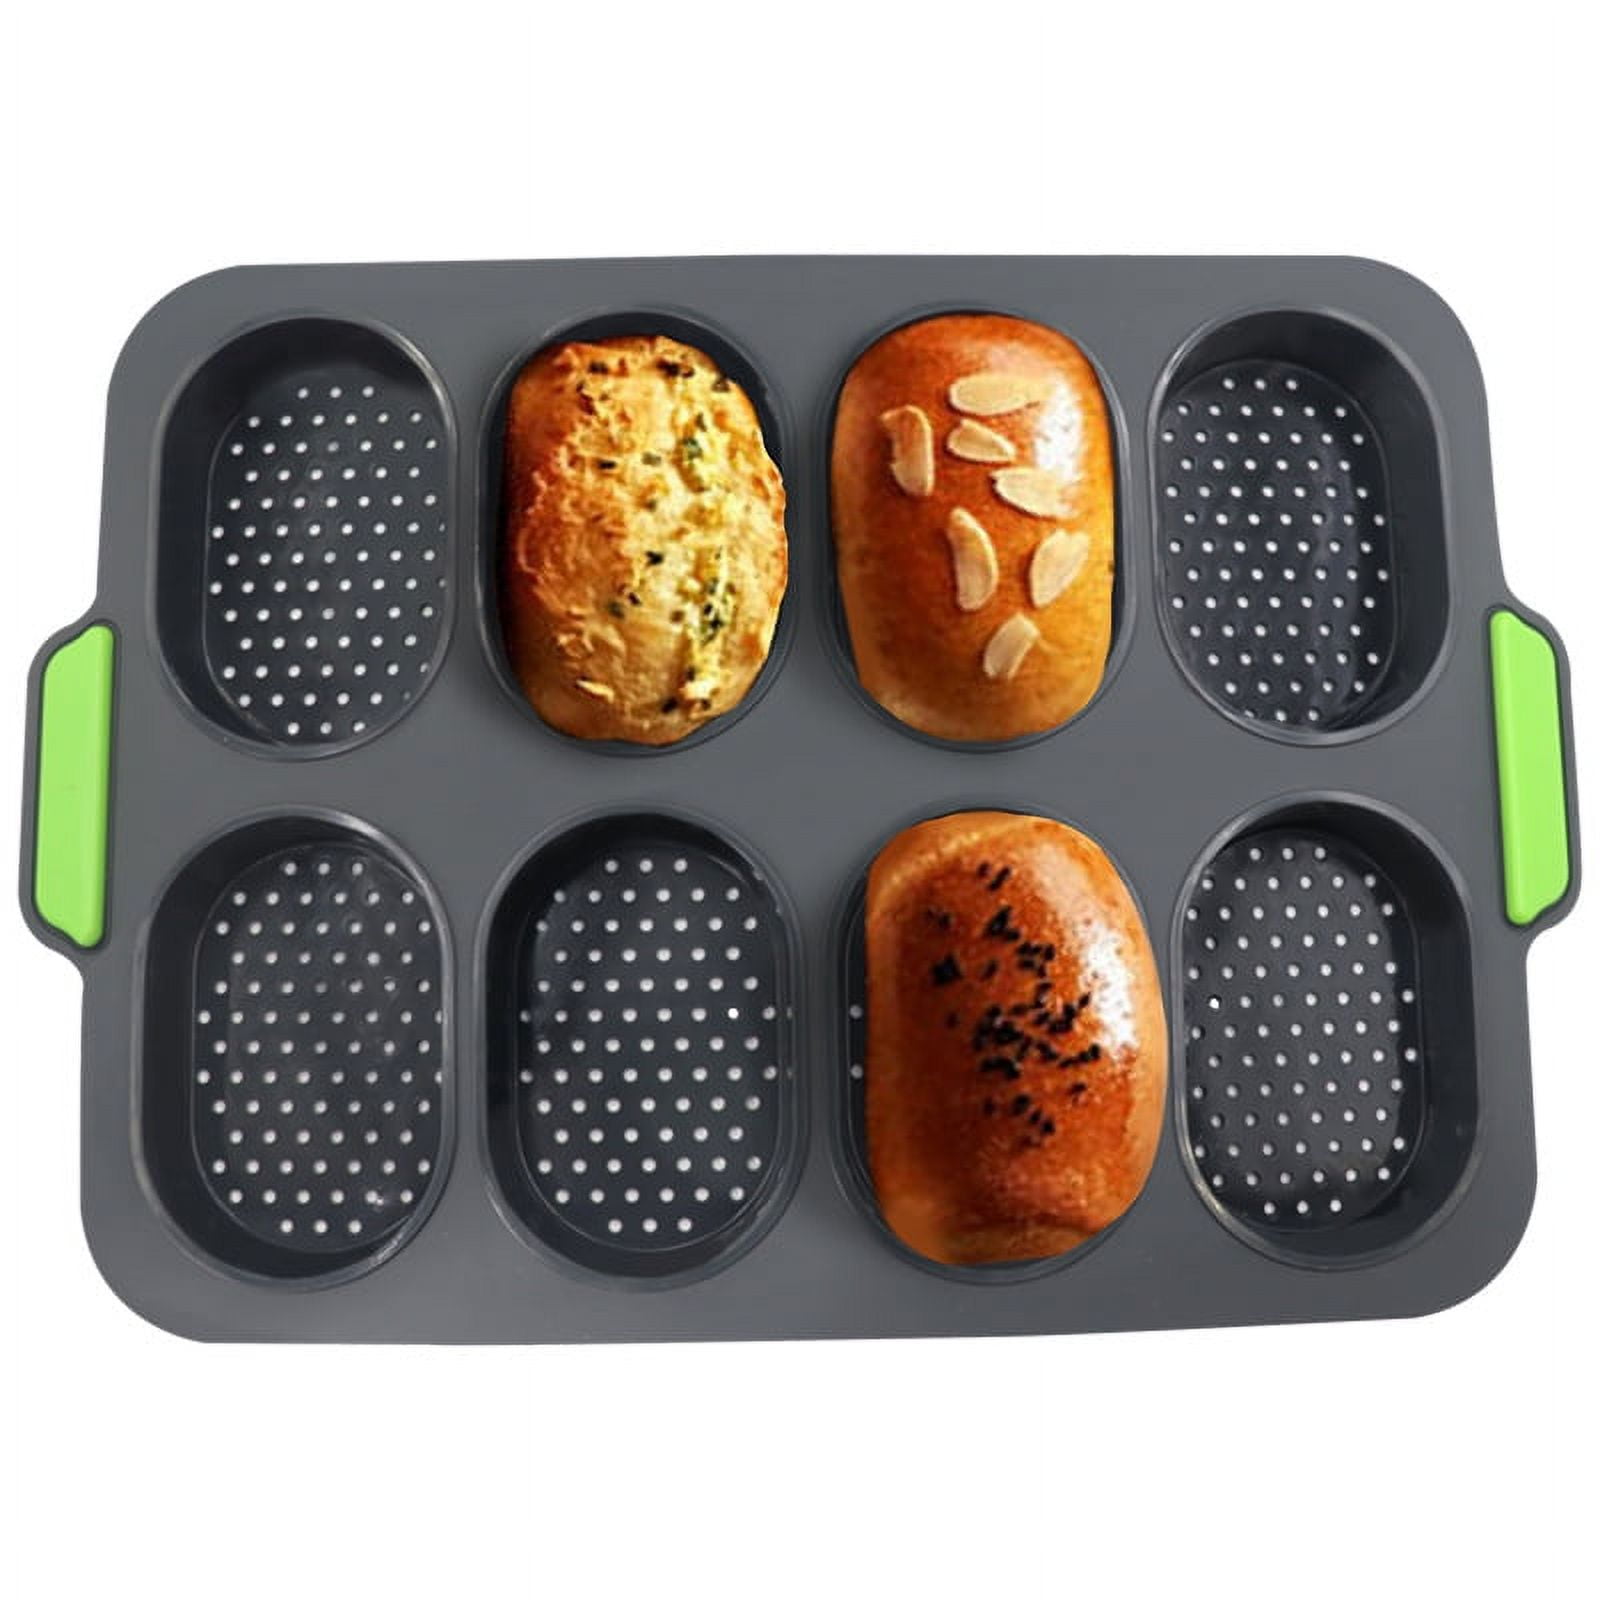 Mini Loaf Pan for Breads 4 Cups Non-stick Silicone Baking Mold  DIY,13.2*9.3*1 In